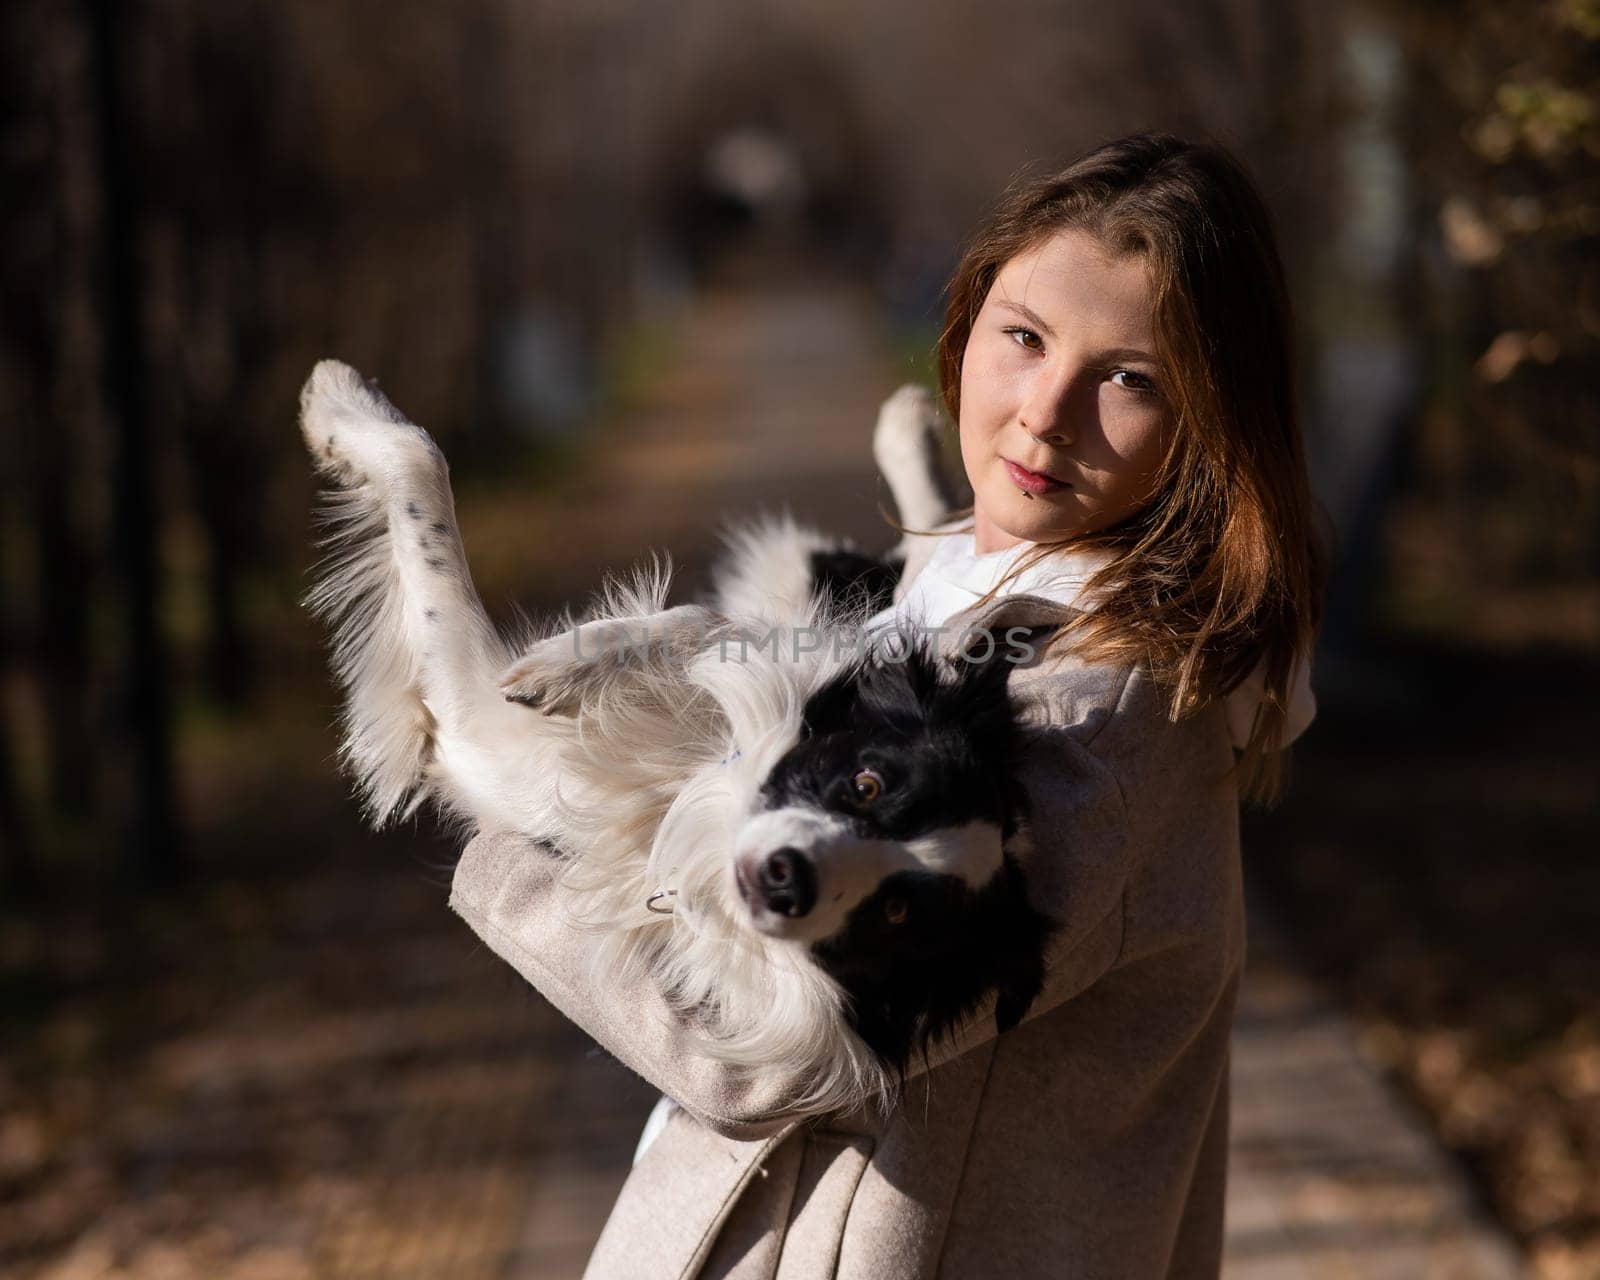 Caucasian woman holding a border collie in her arms while walking in the autumn park. Portrait of a girl with a dog